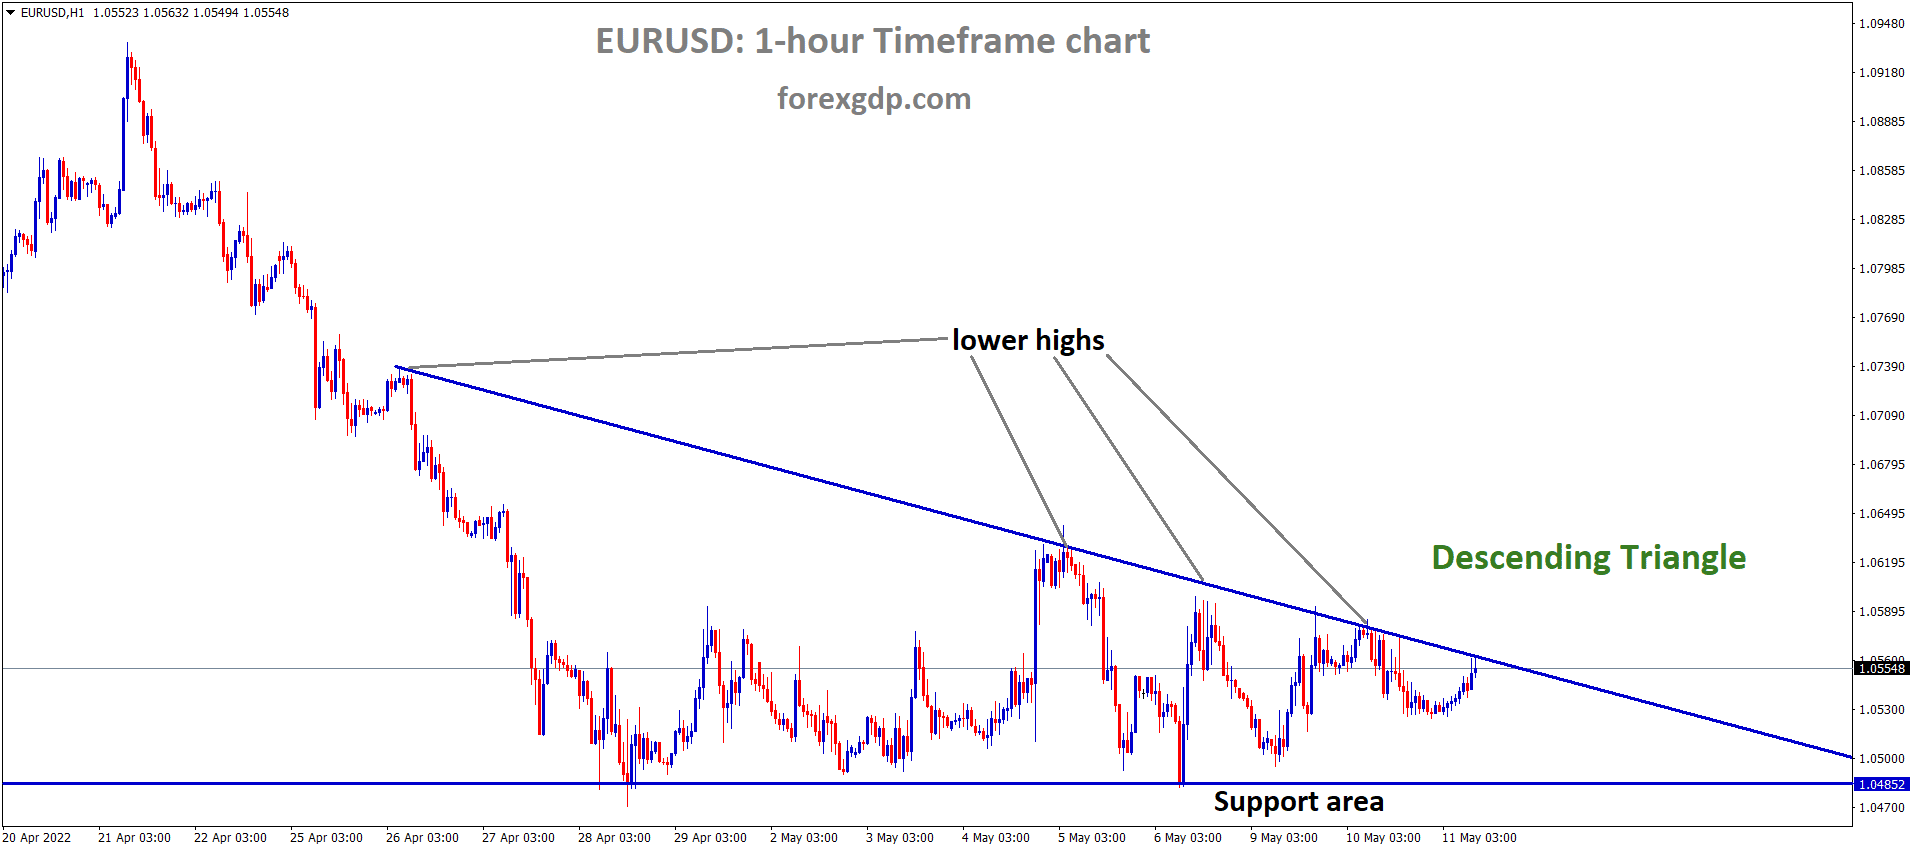 EURUSD H1 Time Frame Analysis Market is moving in the Descending triangle pattern and the market has reached the Lower high area of the Pattern